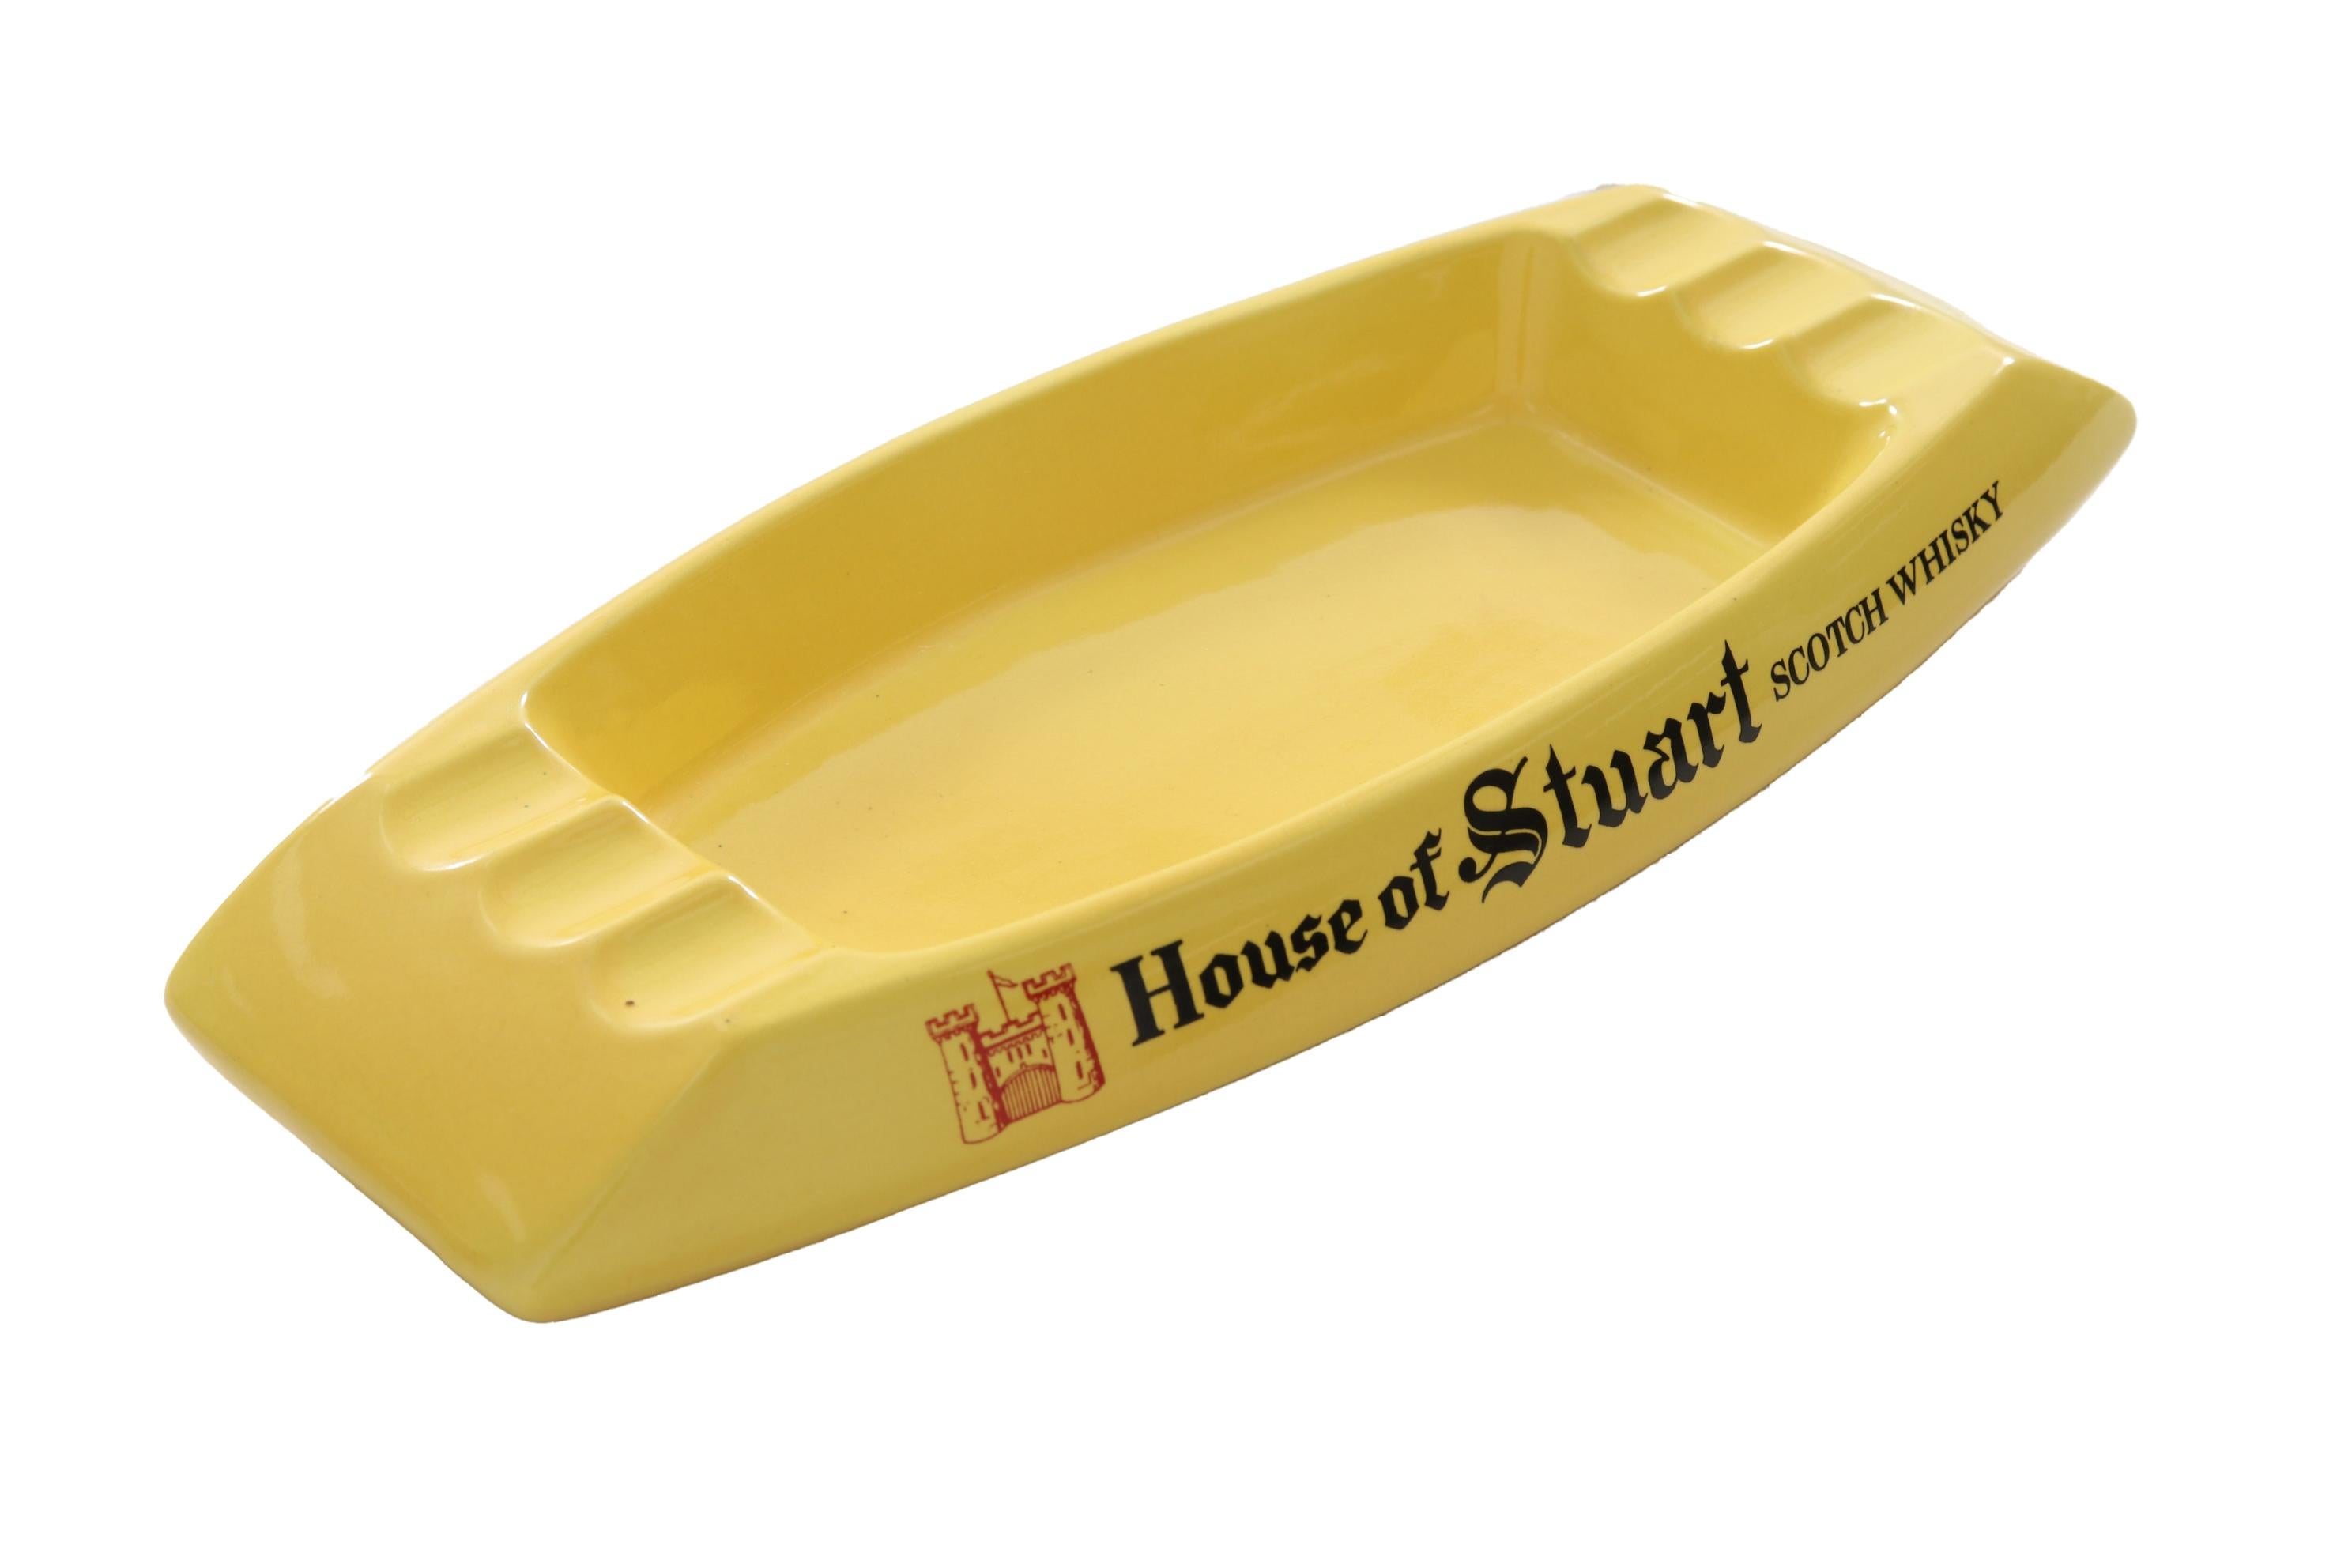 A ceramic House of Stuart Scotch Whisky branded cigar ashtray. Bright yellow and shaped like a boat, the ashtray has three cigar rests at each end and is branded with the House of Stuart name on each side. Marked 